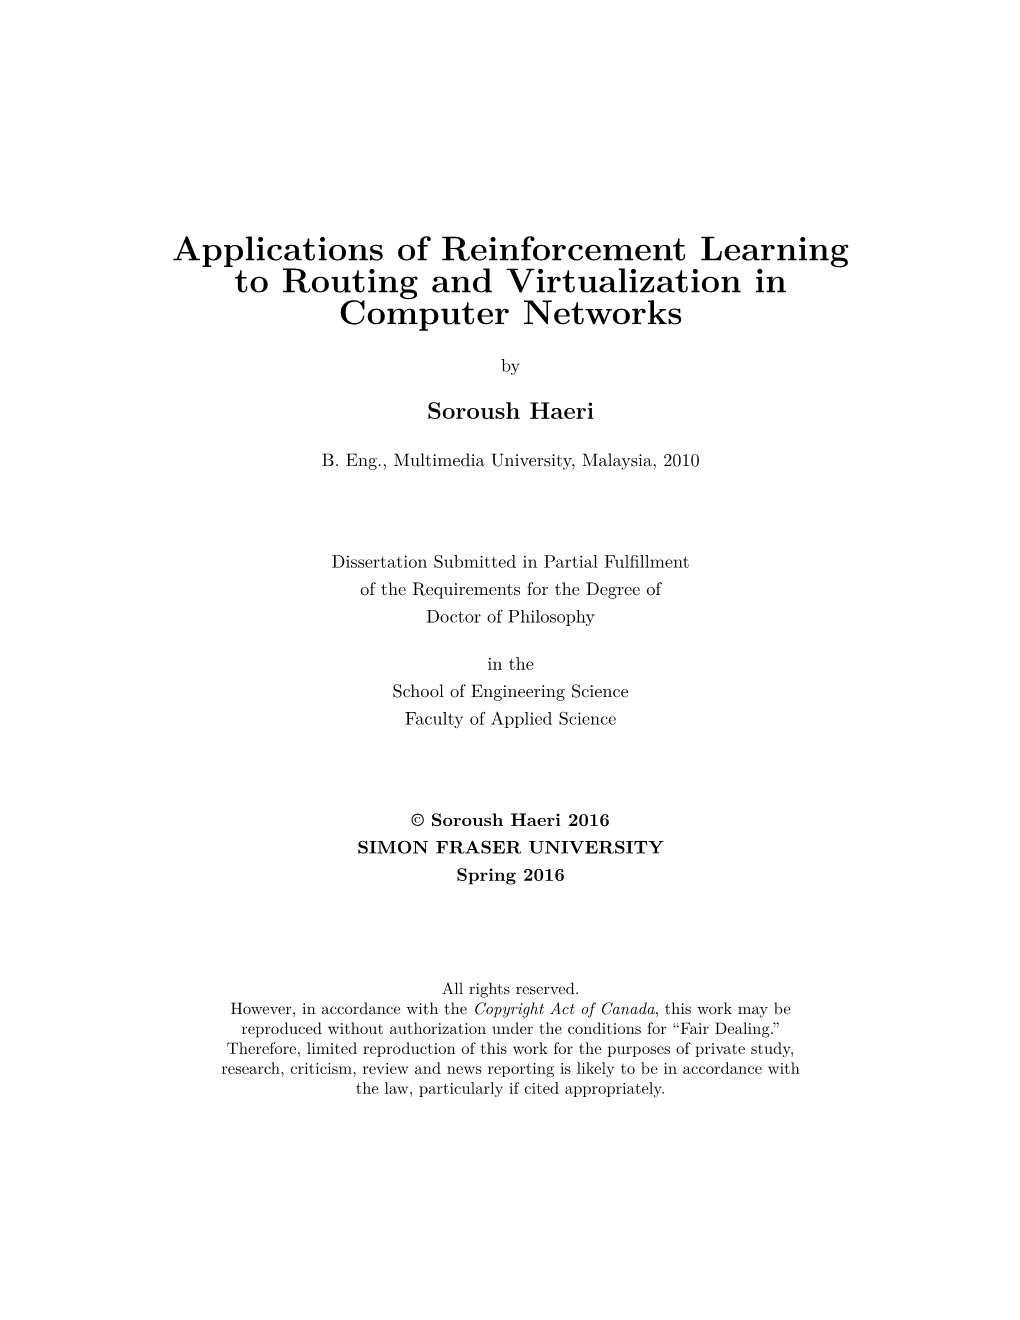 Applications of Reinforcement Learning to Routing and Virtualization in Computer Networks